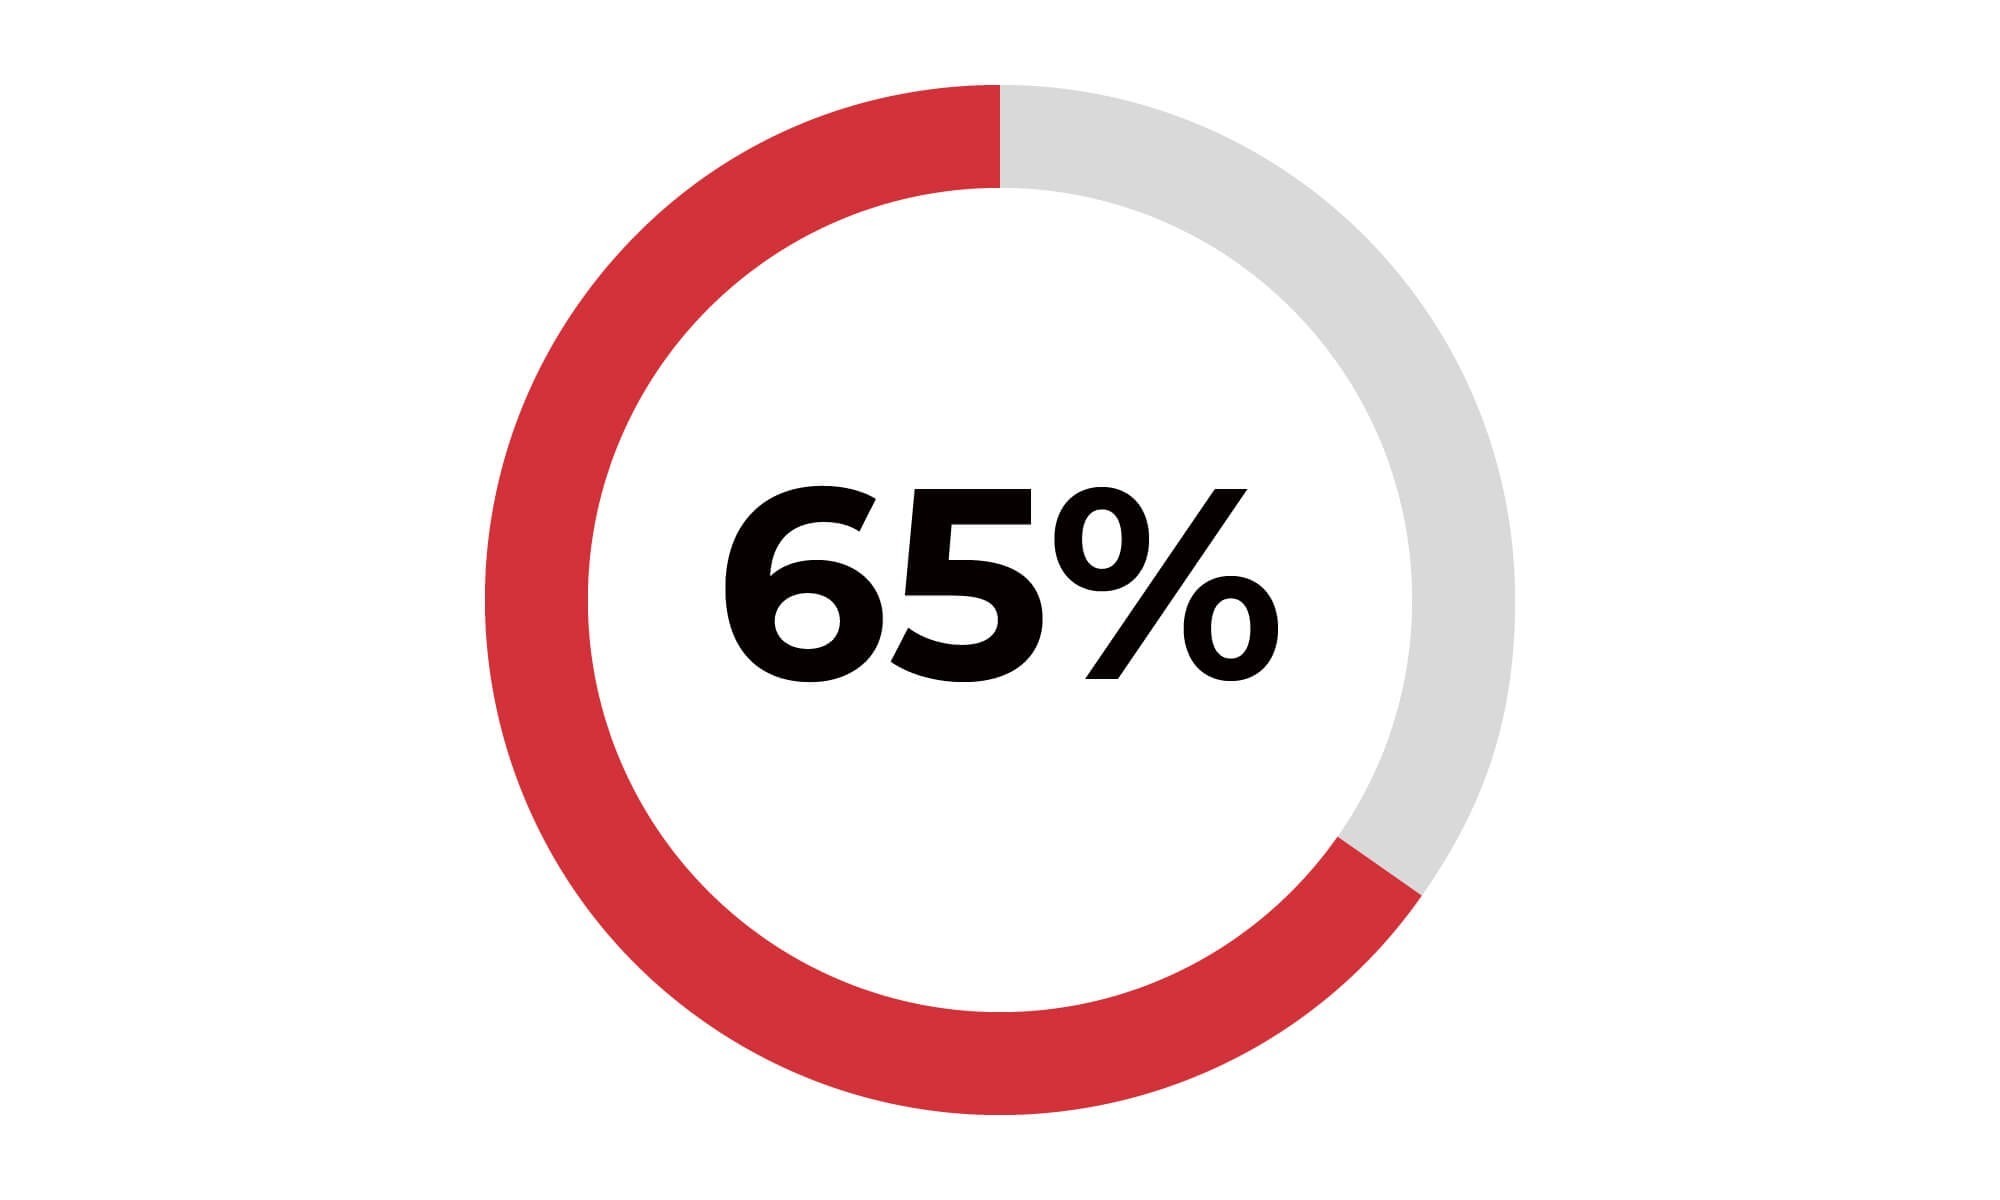 65% of Apex executive search placements are successfully completed within less than 60 days